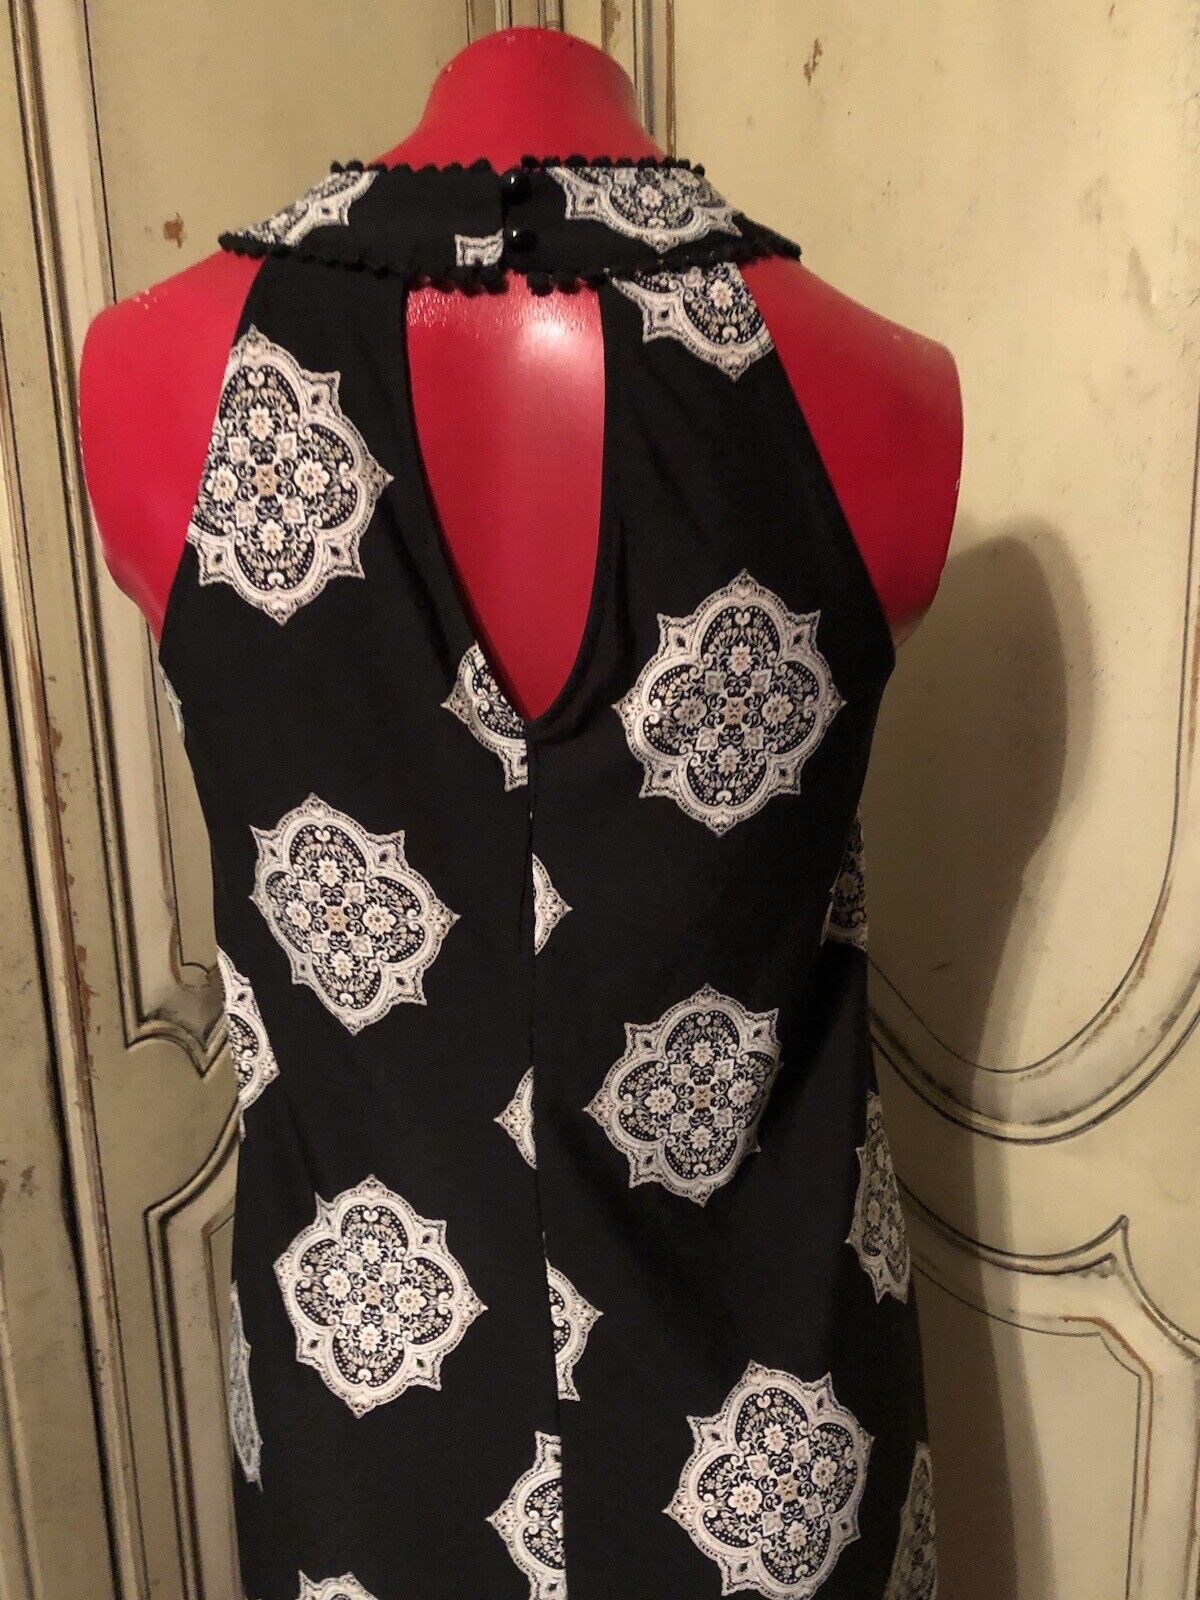 Woman’s Dress Design By Three Pink Hearts Size S